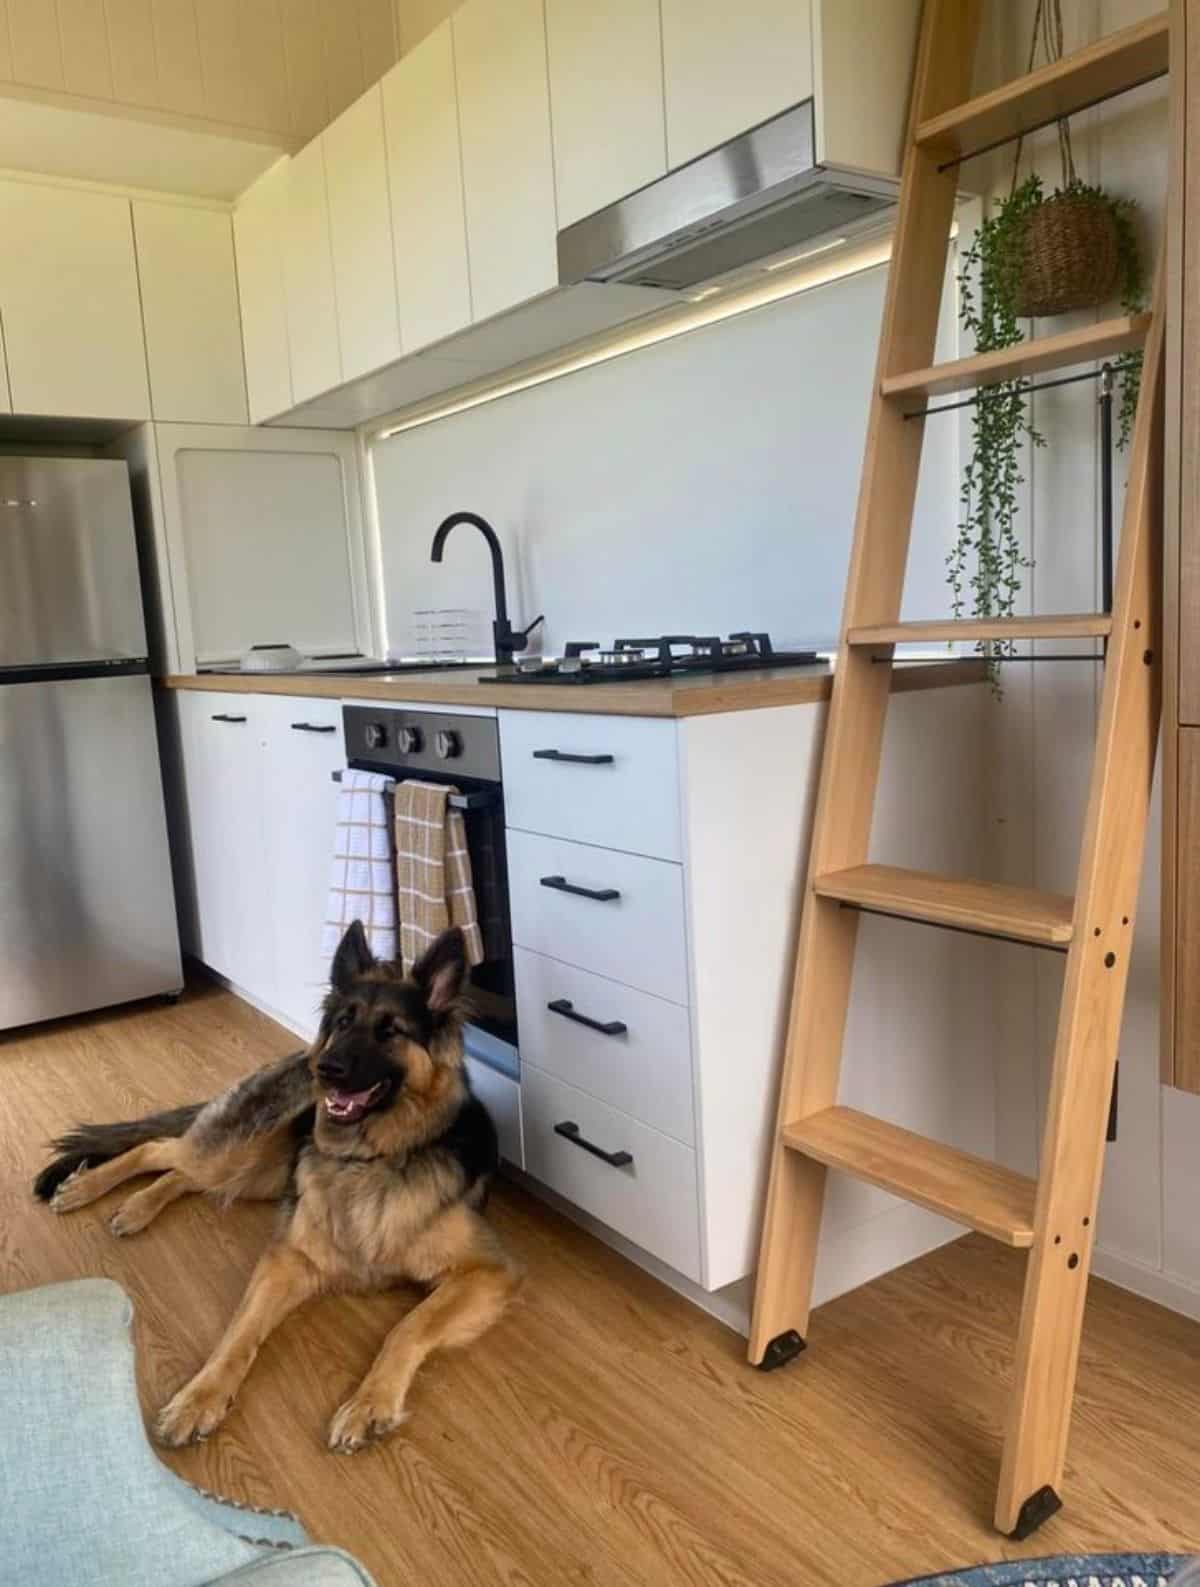 kitchen area of sustainable tiny home